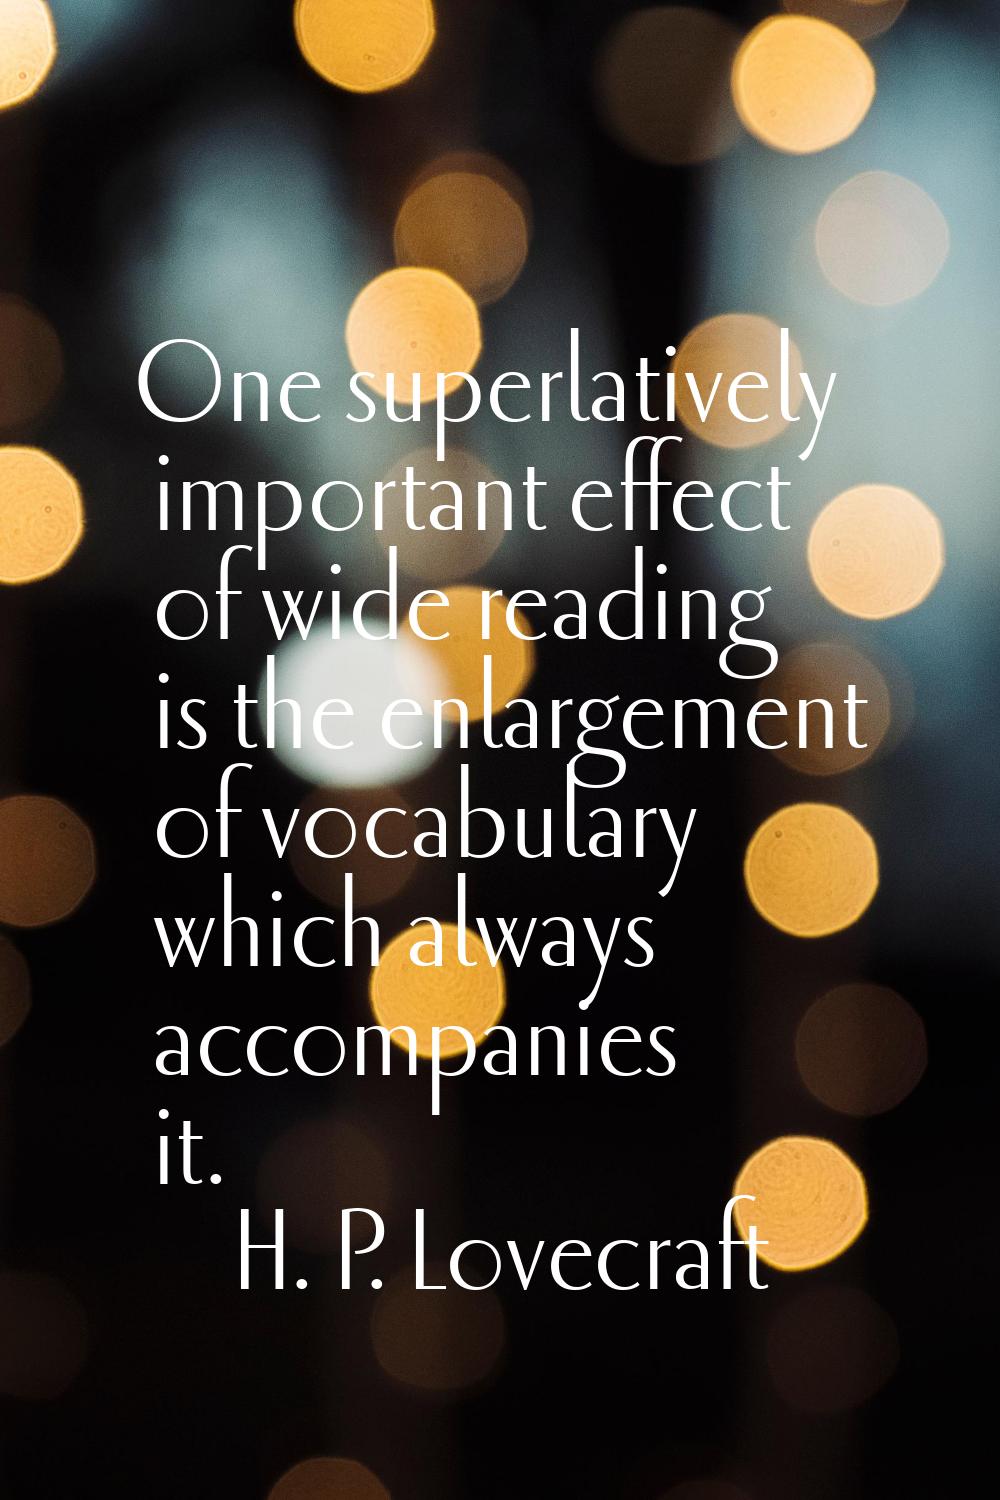 One superlatively important effect of wide reading is the enlargement of vocabulary which always ac